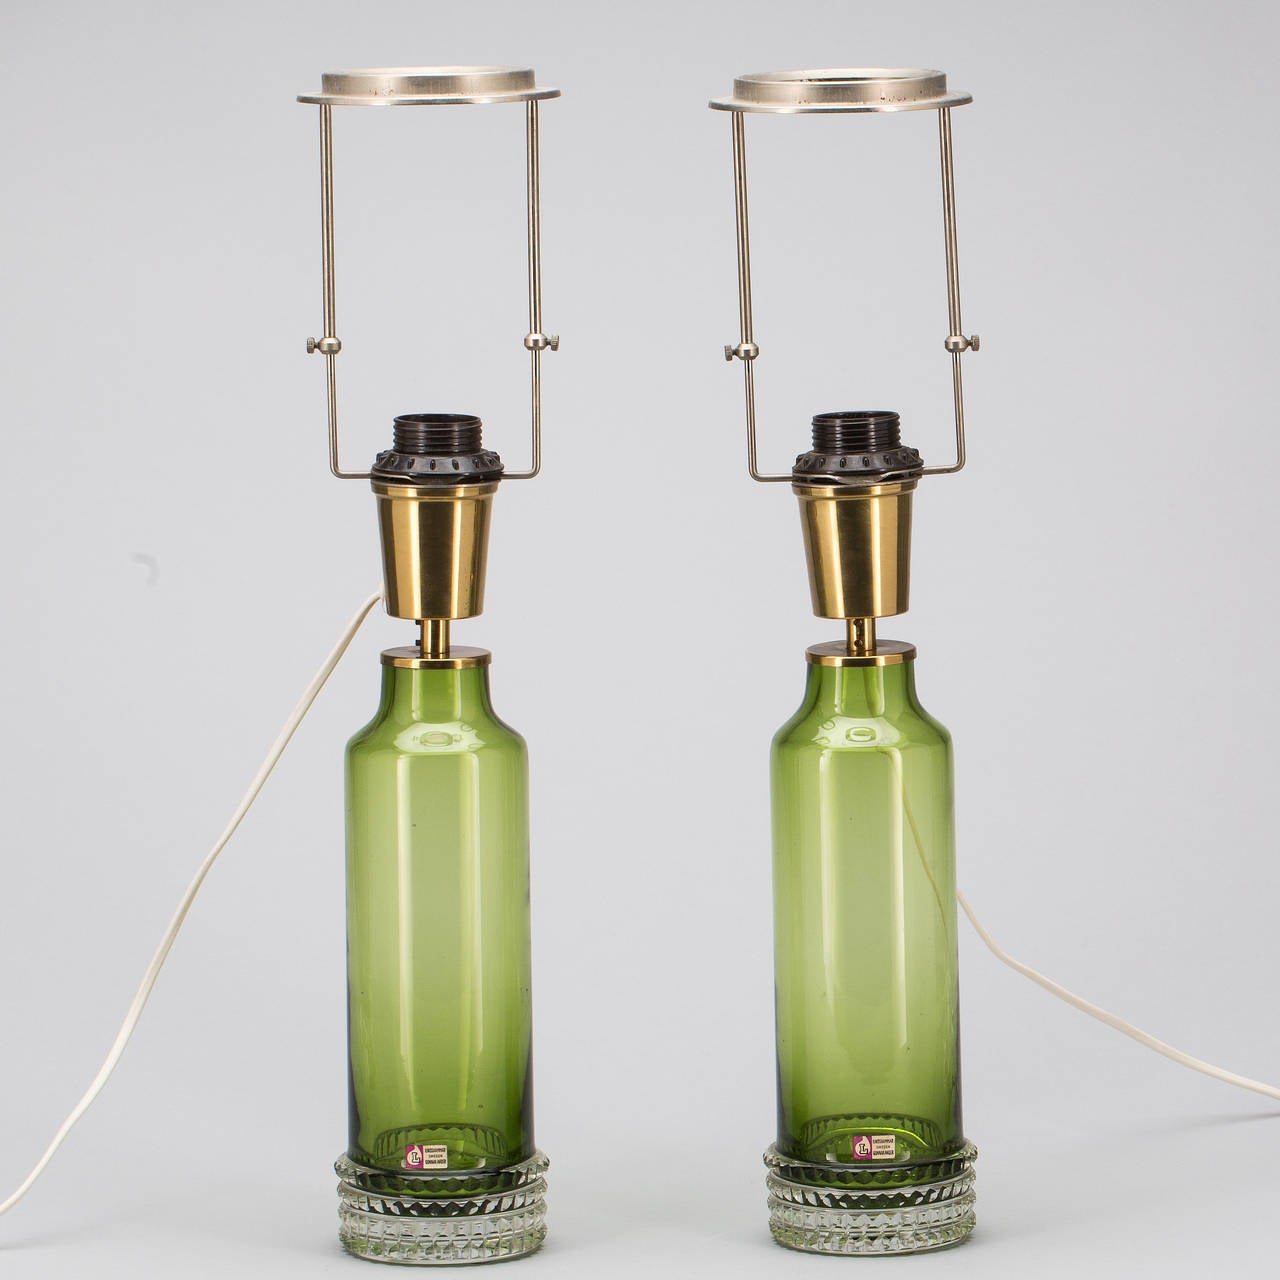 A pair of table lamp designed by Gunnar Anderson for Lindshammar, Sweden, circa 1960.
Green glass. Base height 15